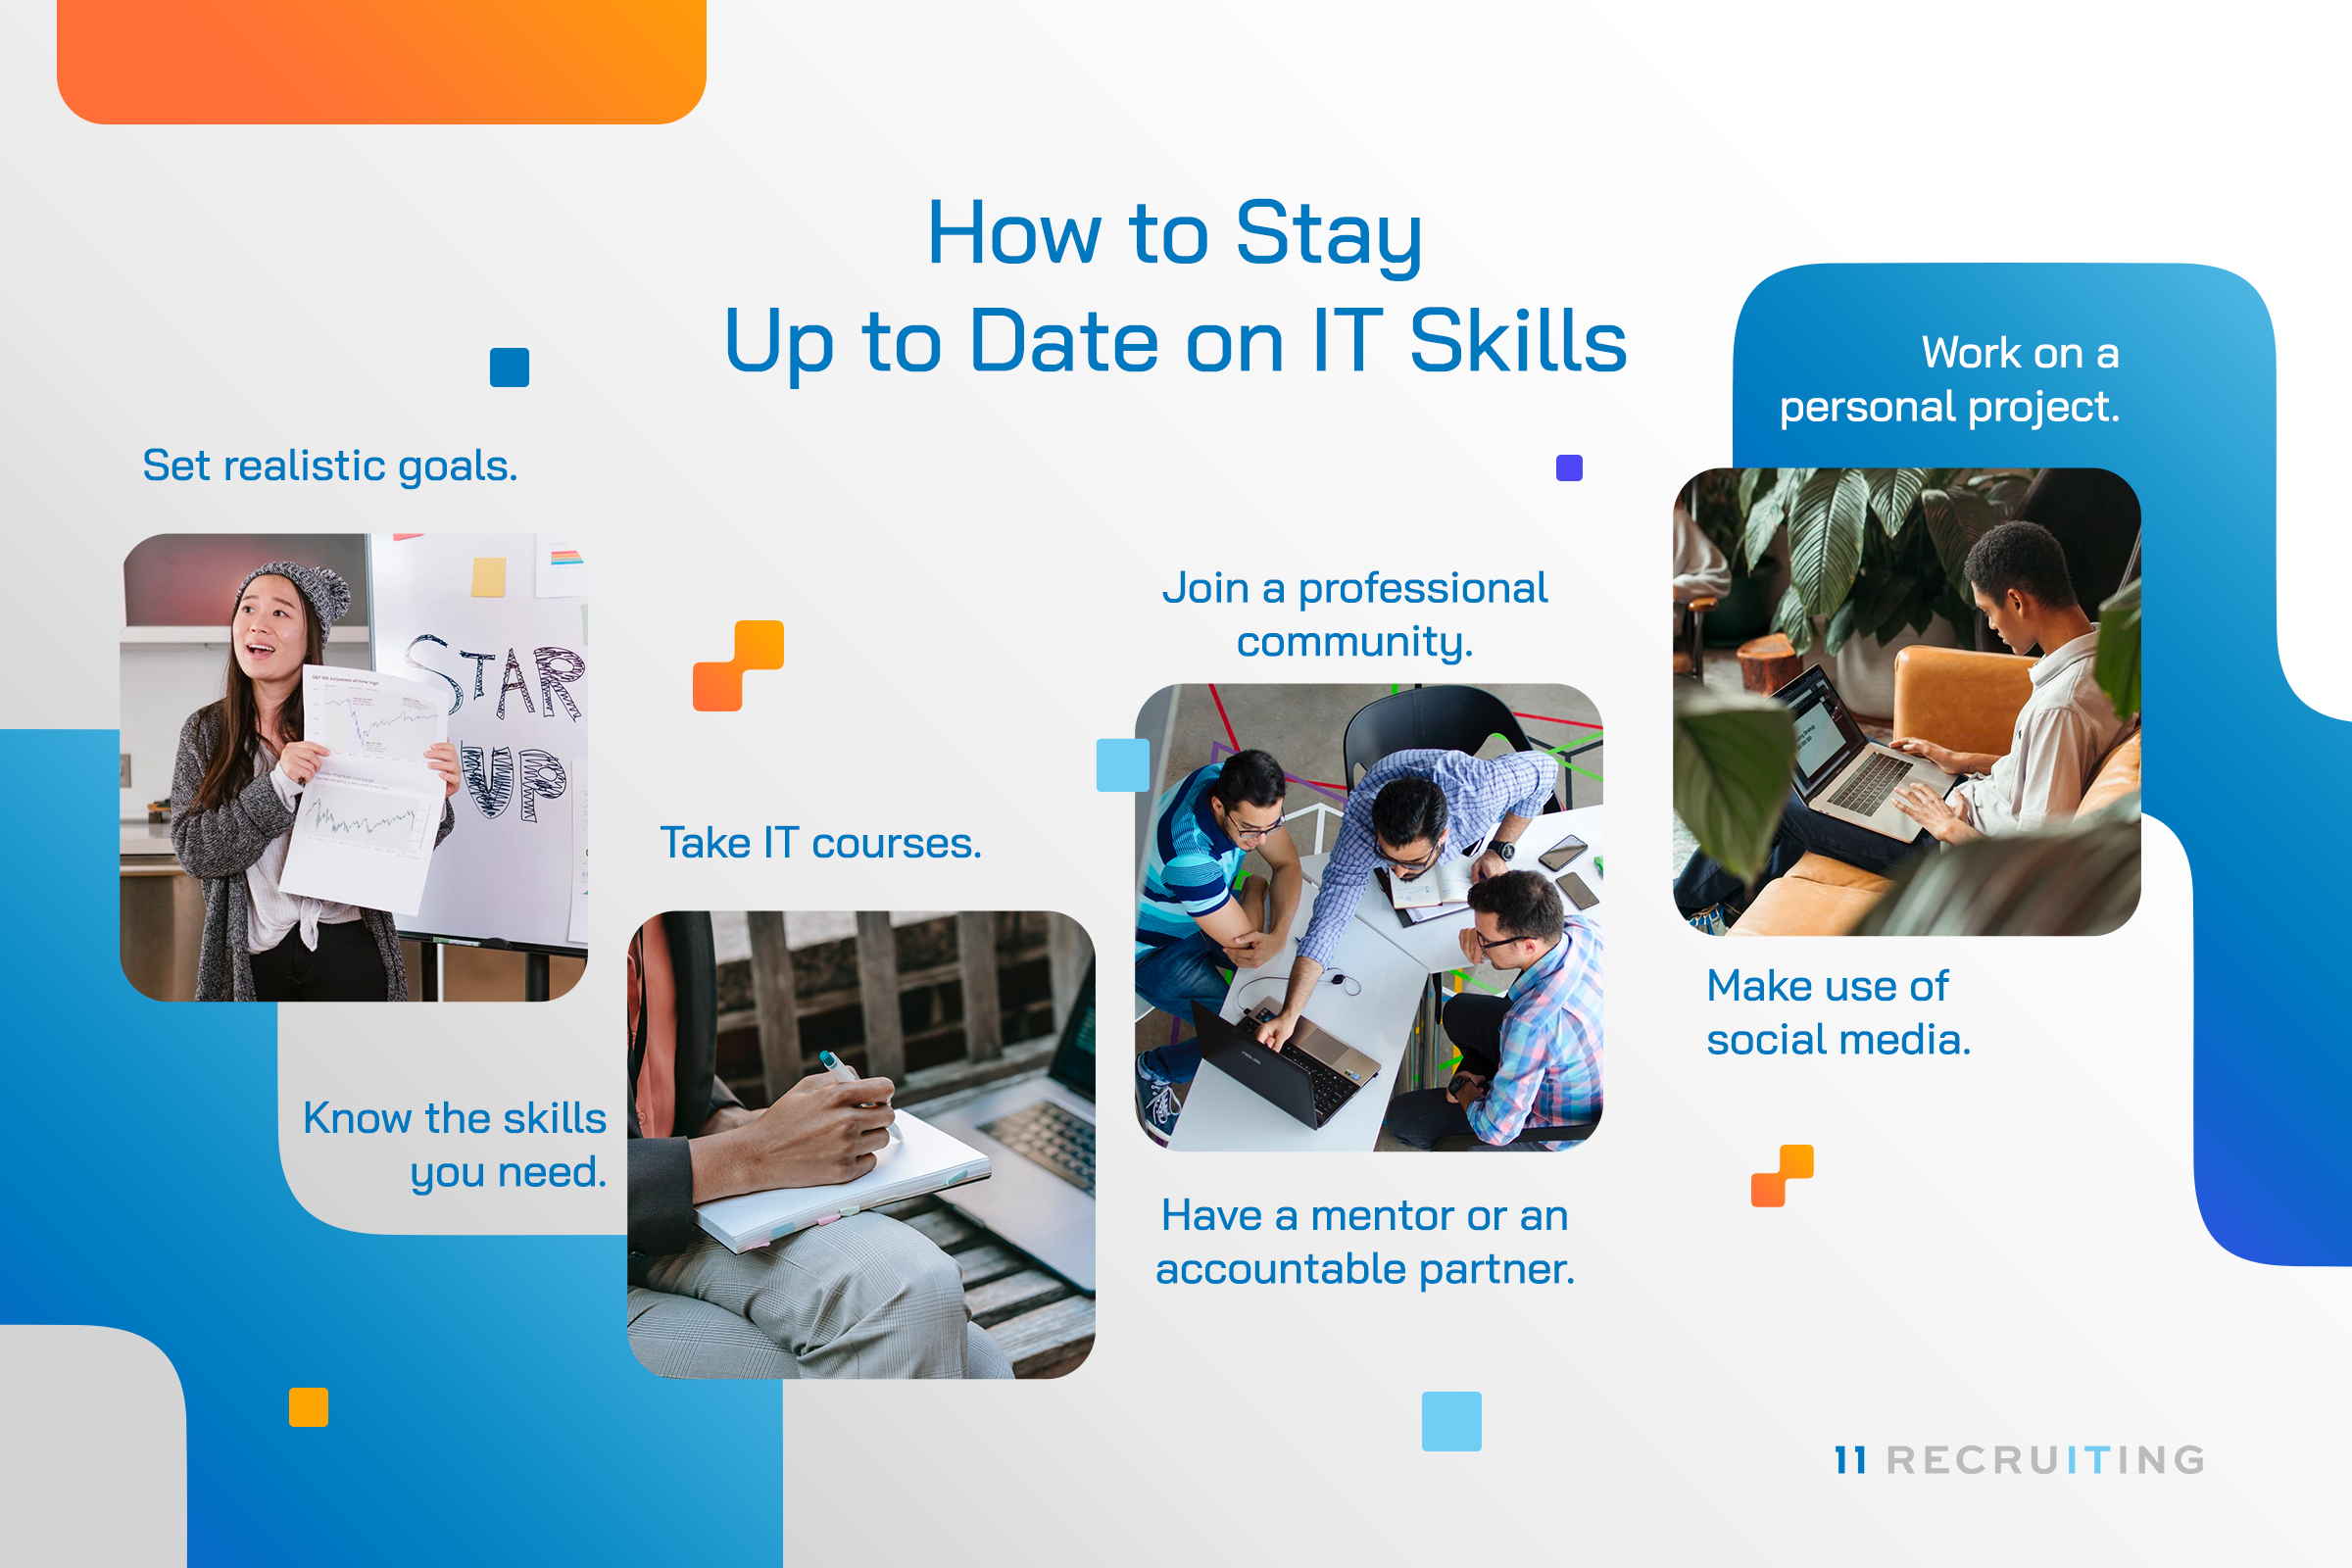 How to Stay Up to Date on IT Skills